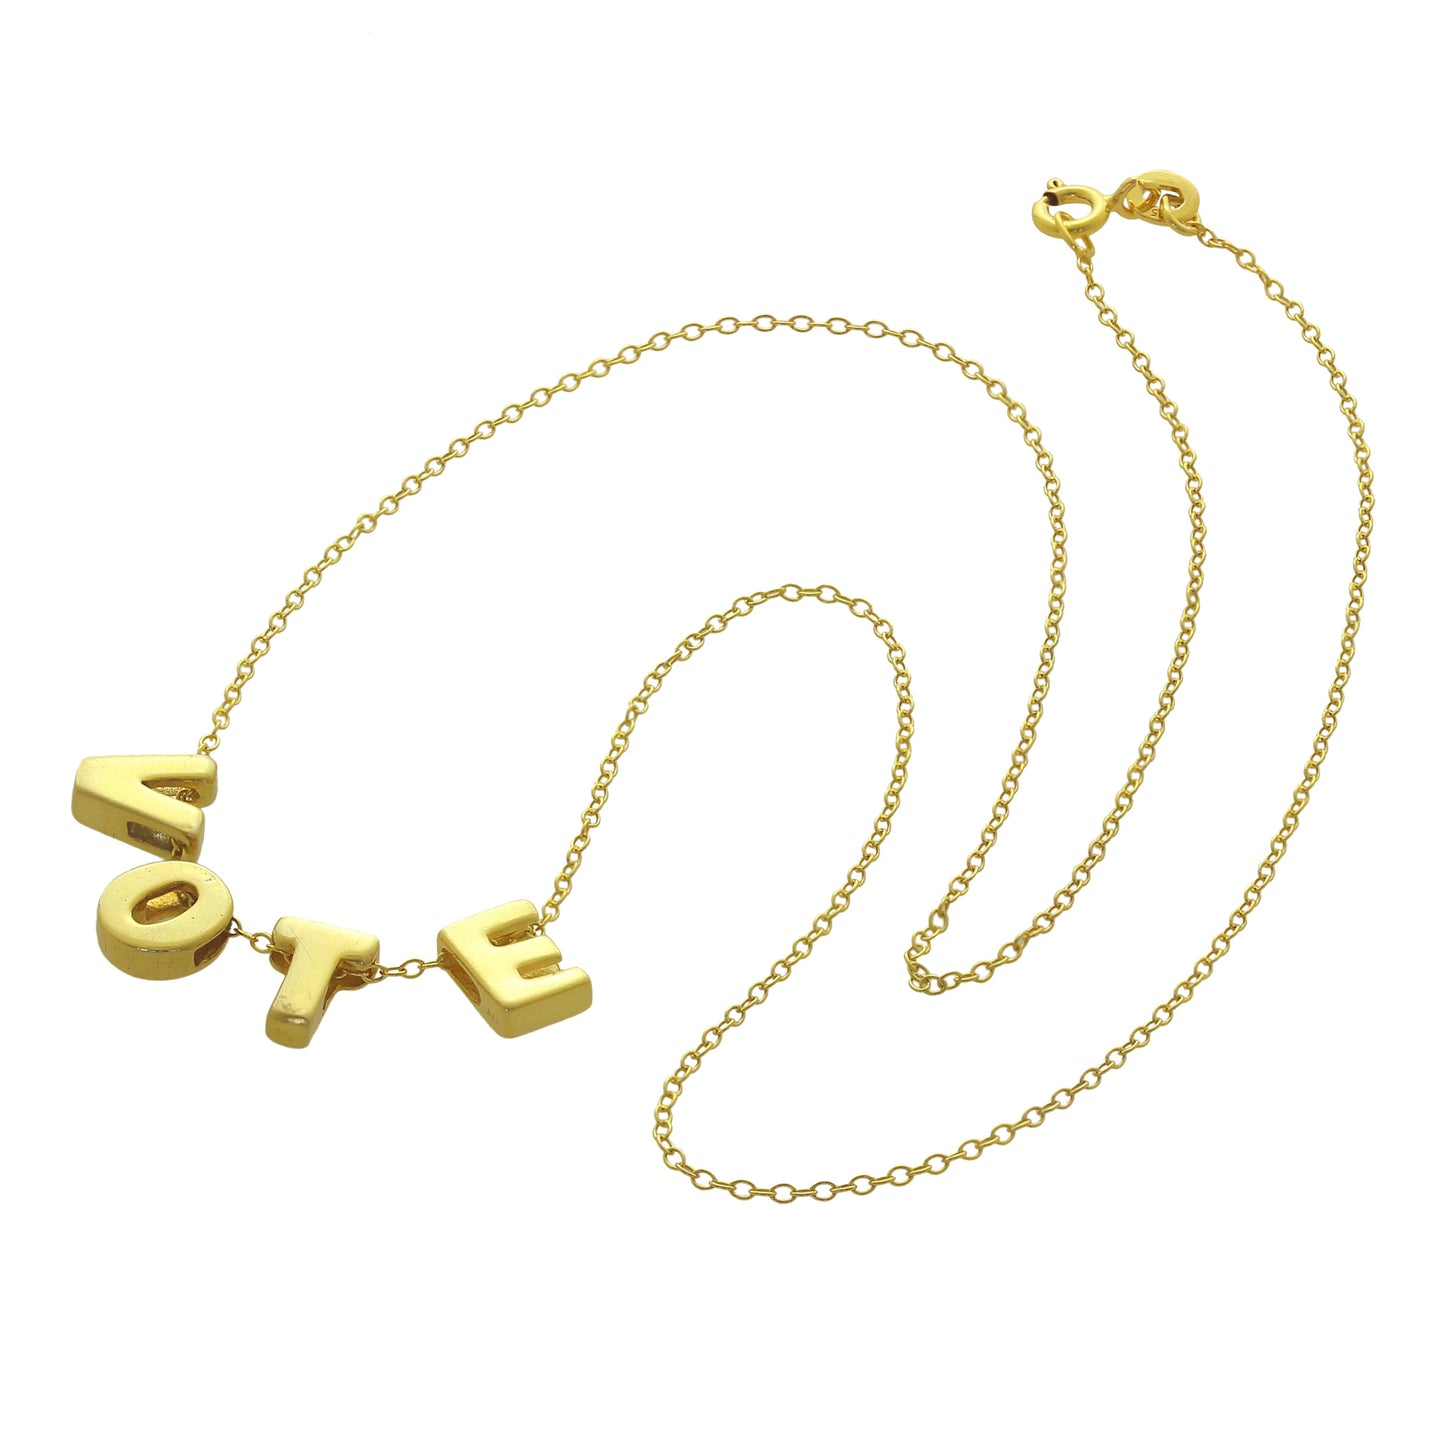 Gold Plated Sterling Silver VOTE Bead Necklace 18 Inches